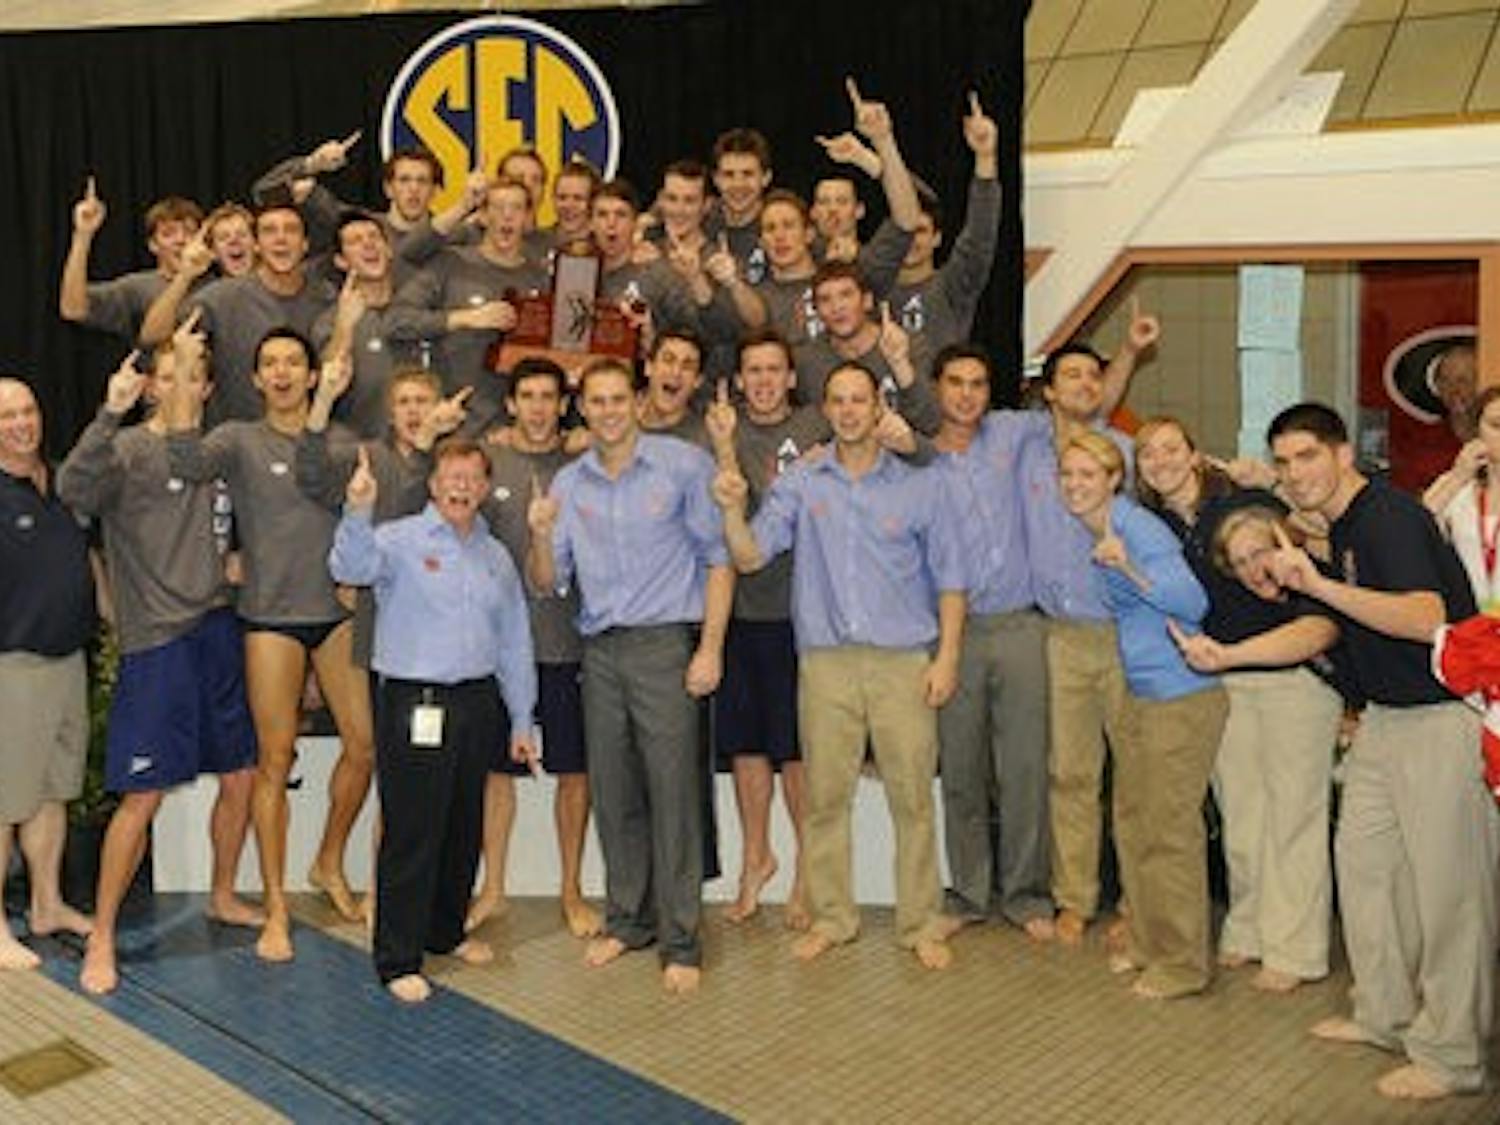 The Auburn men celebrate winning their 14th straight SEC Swimming and Diving Championship Saturday.
SEC Swimming and Diving Championships in Athens, GA.,  on Saturday, Feb. 20, 2010. day 4 FINALS
Todd Van Emst